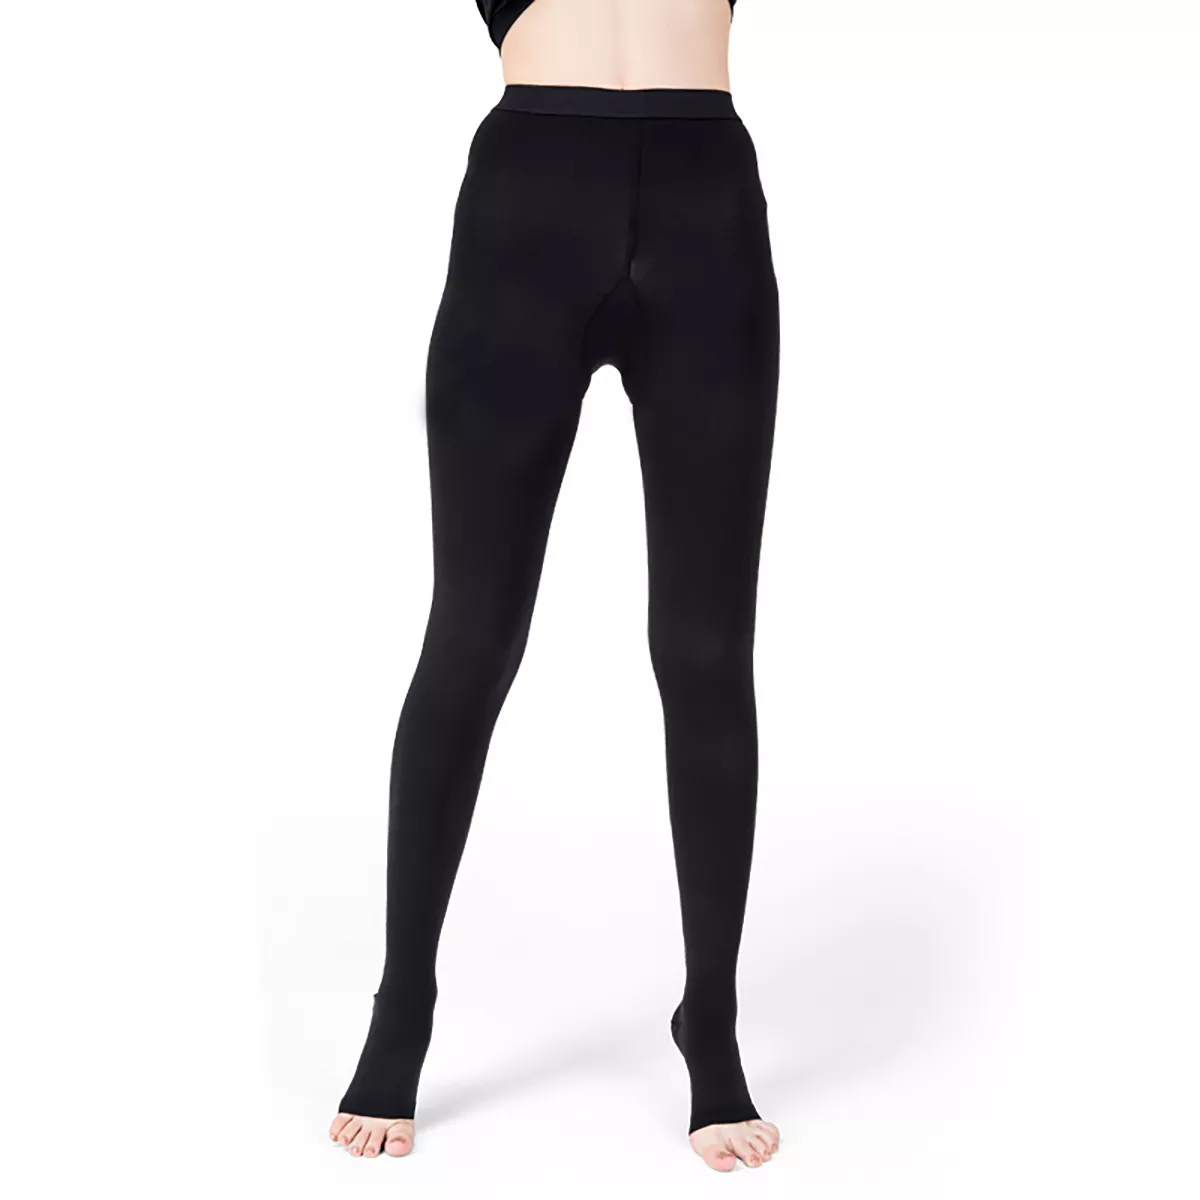  Compression Leggings For Women Circulation 20-30mmHg -  Opaque Footless Support Stockings For Post Surgery Recovery